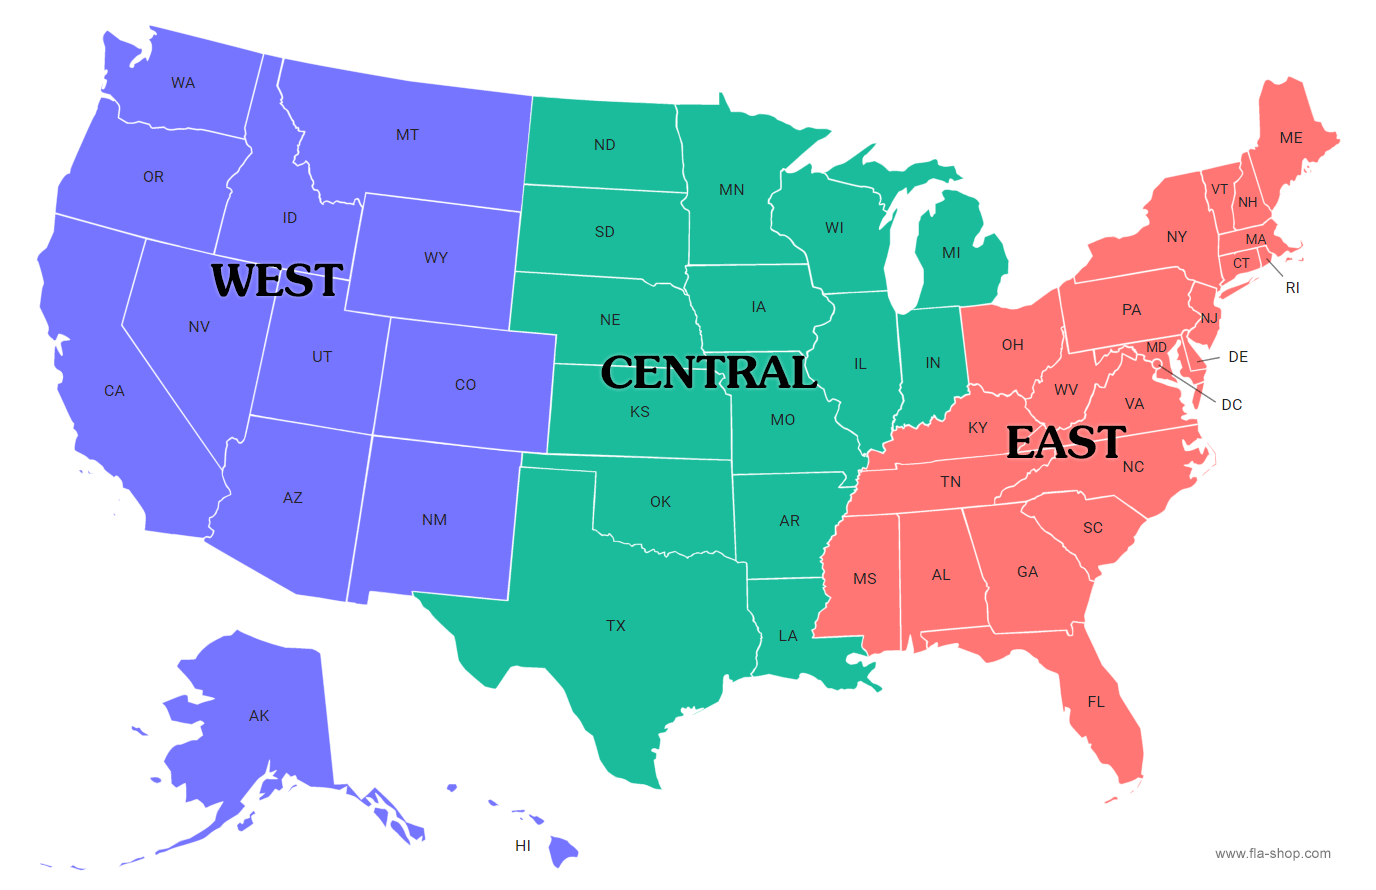 Map of the U.S. with 3 regions